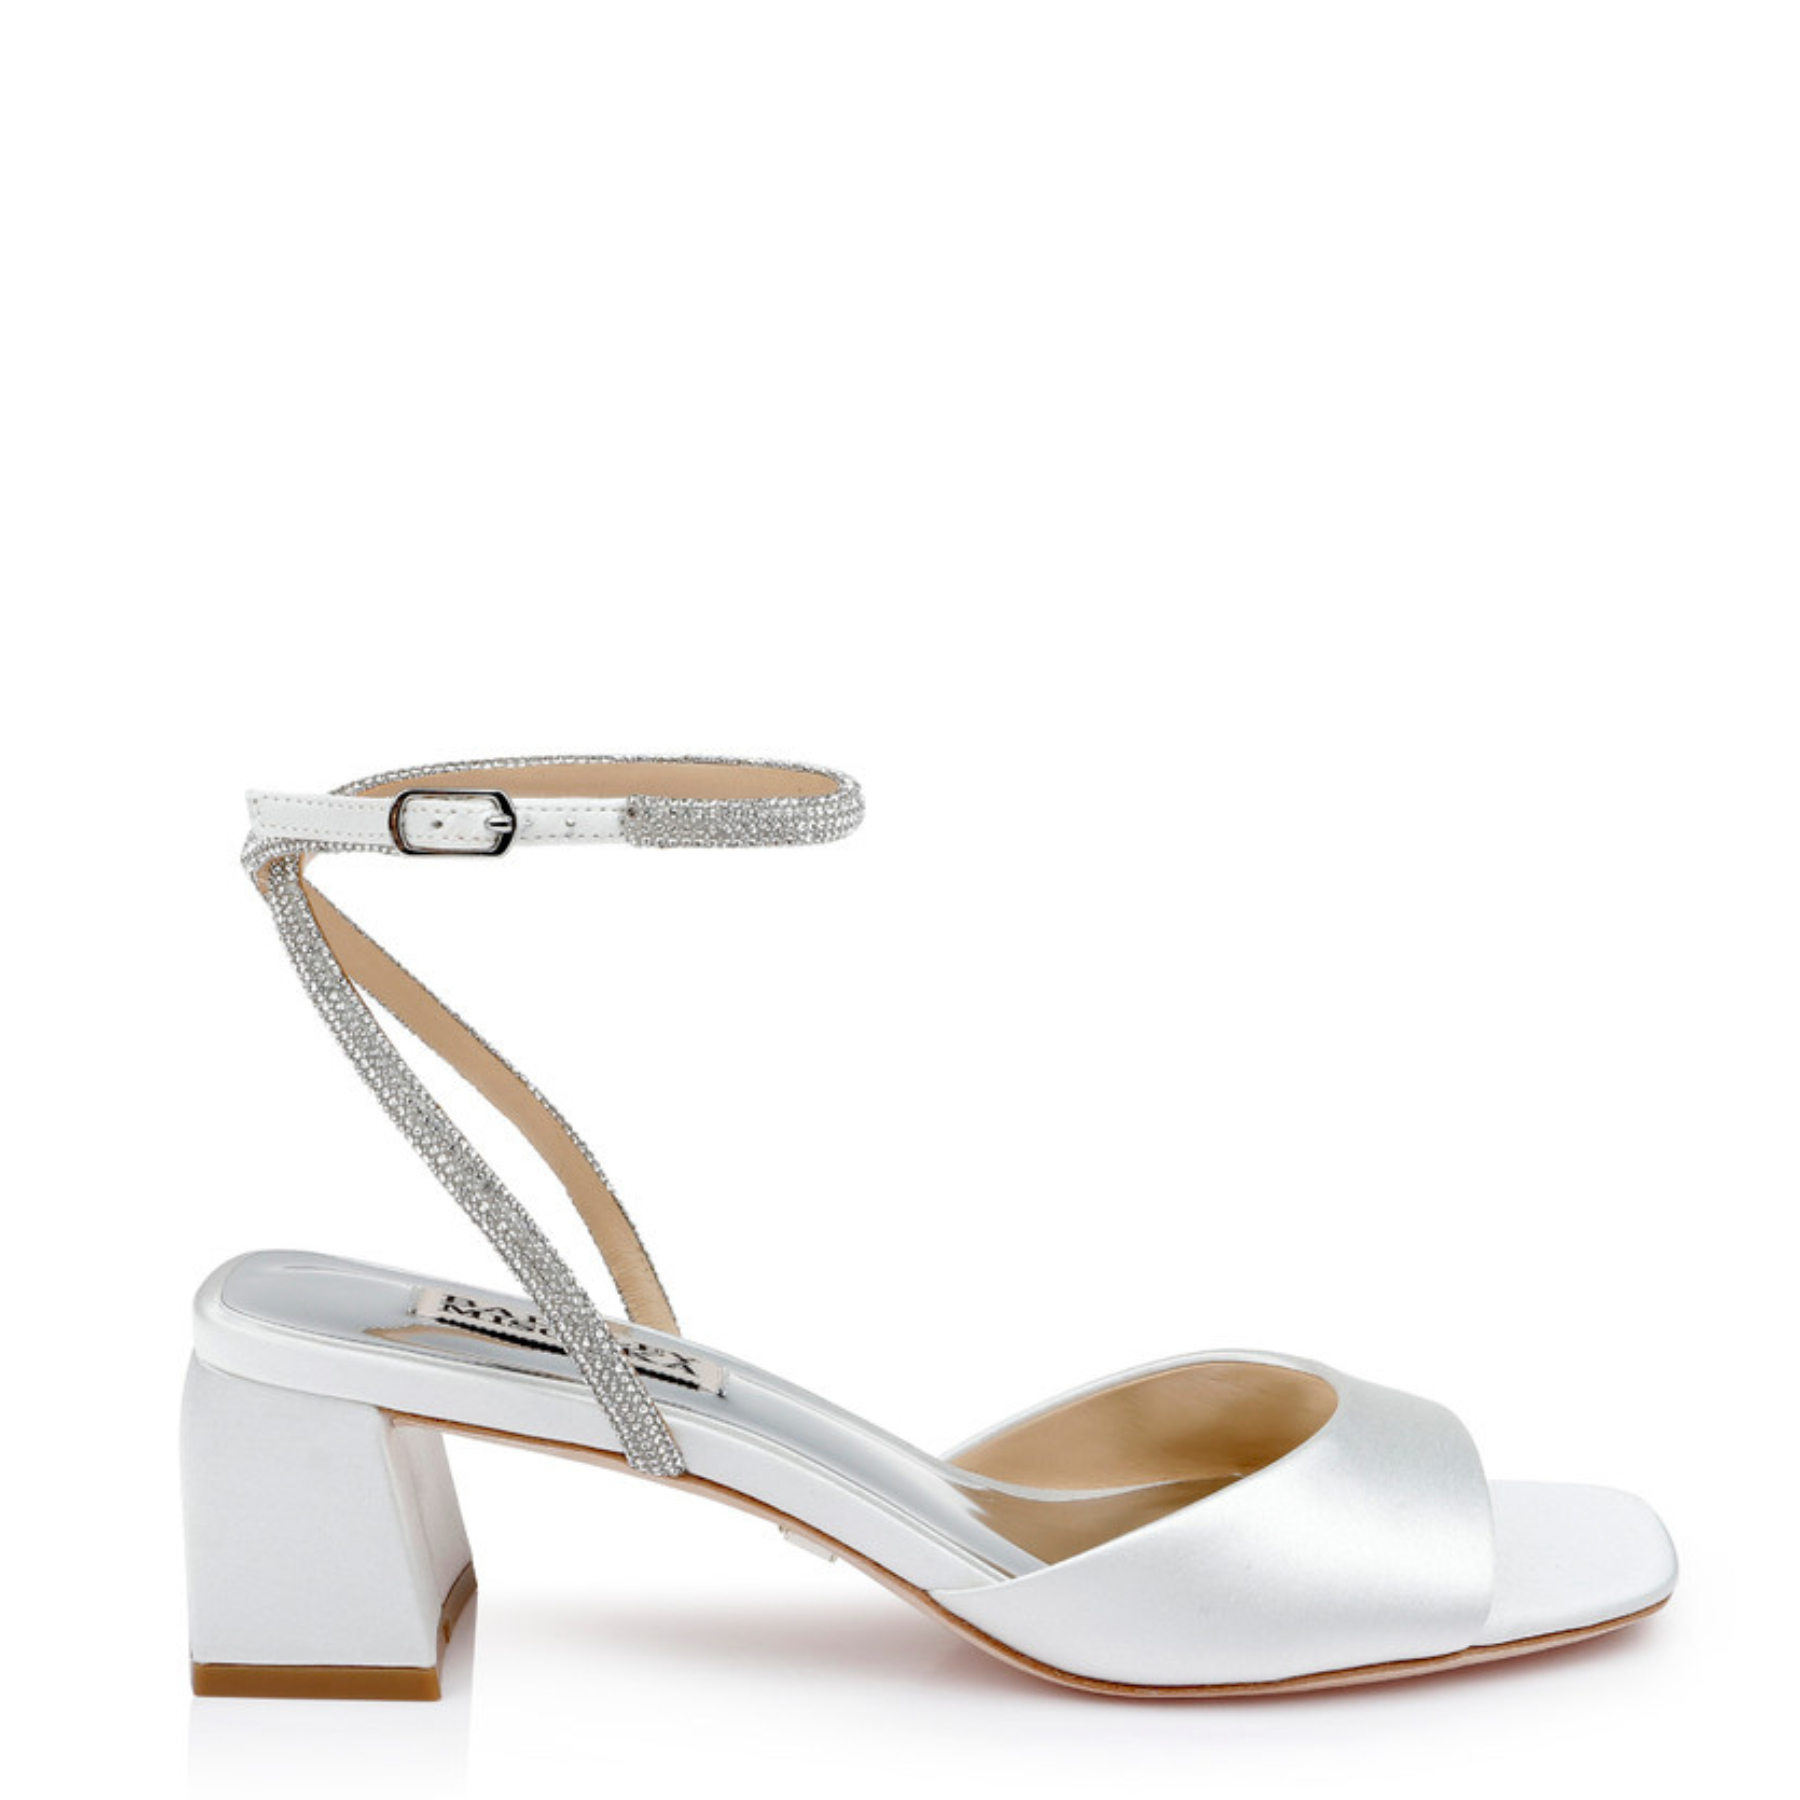 Infinity - Satin Block Low Heels with Crystal Ankle Strap - Soft White